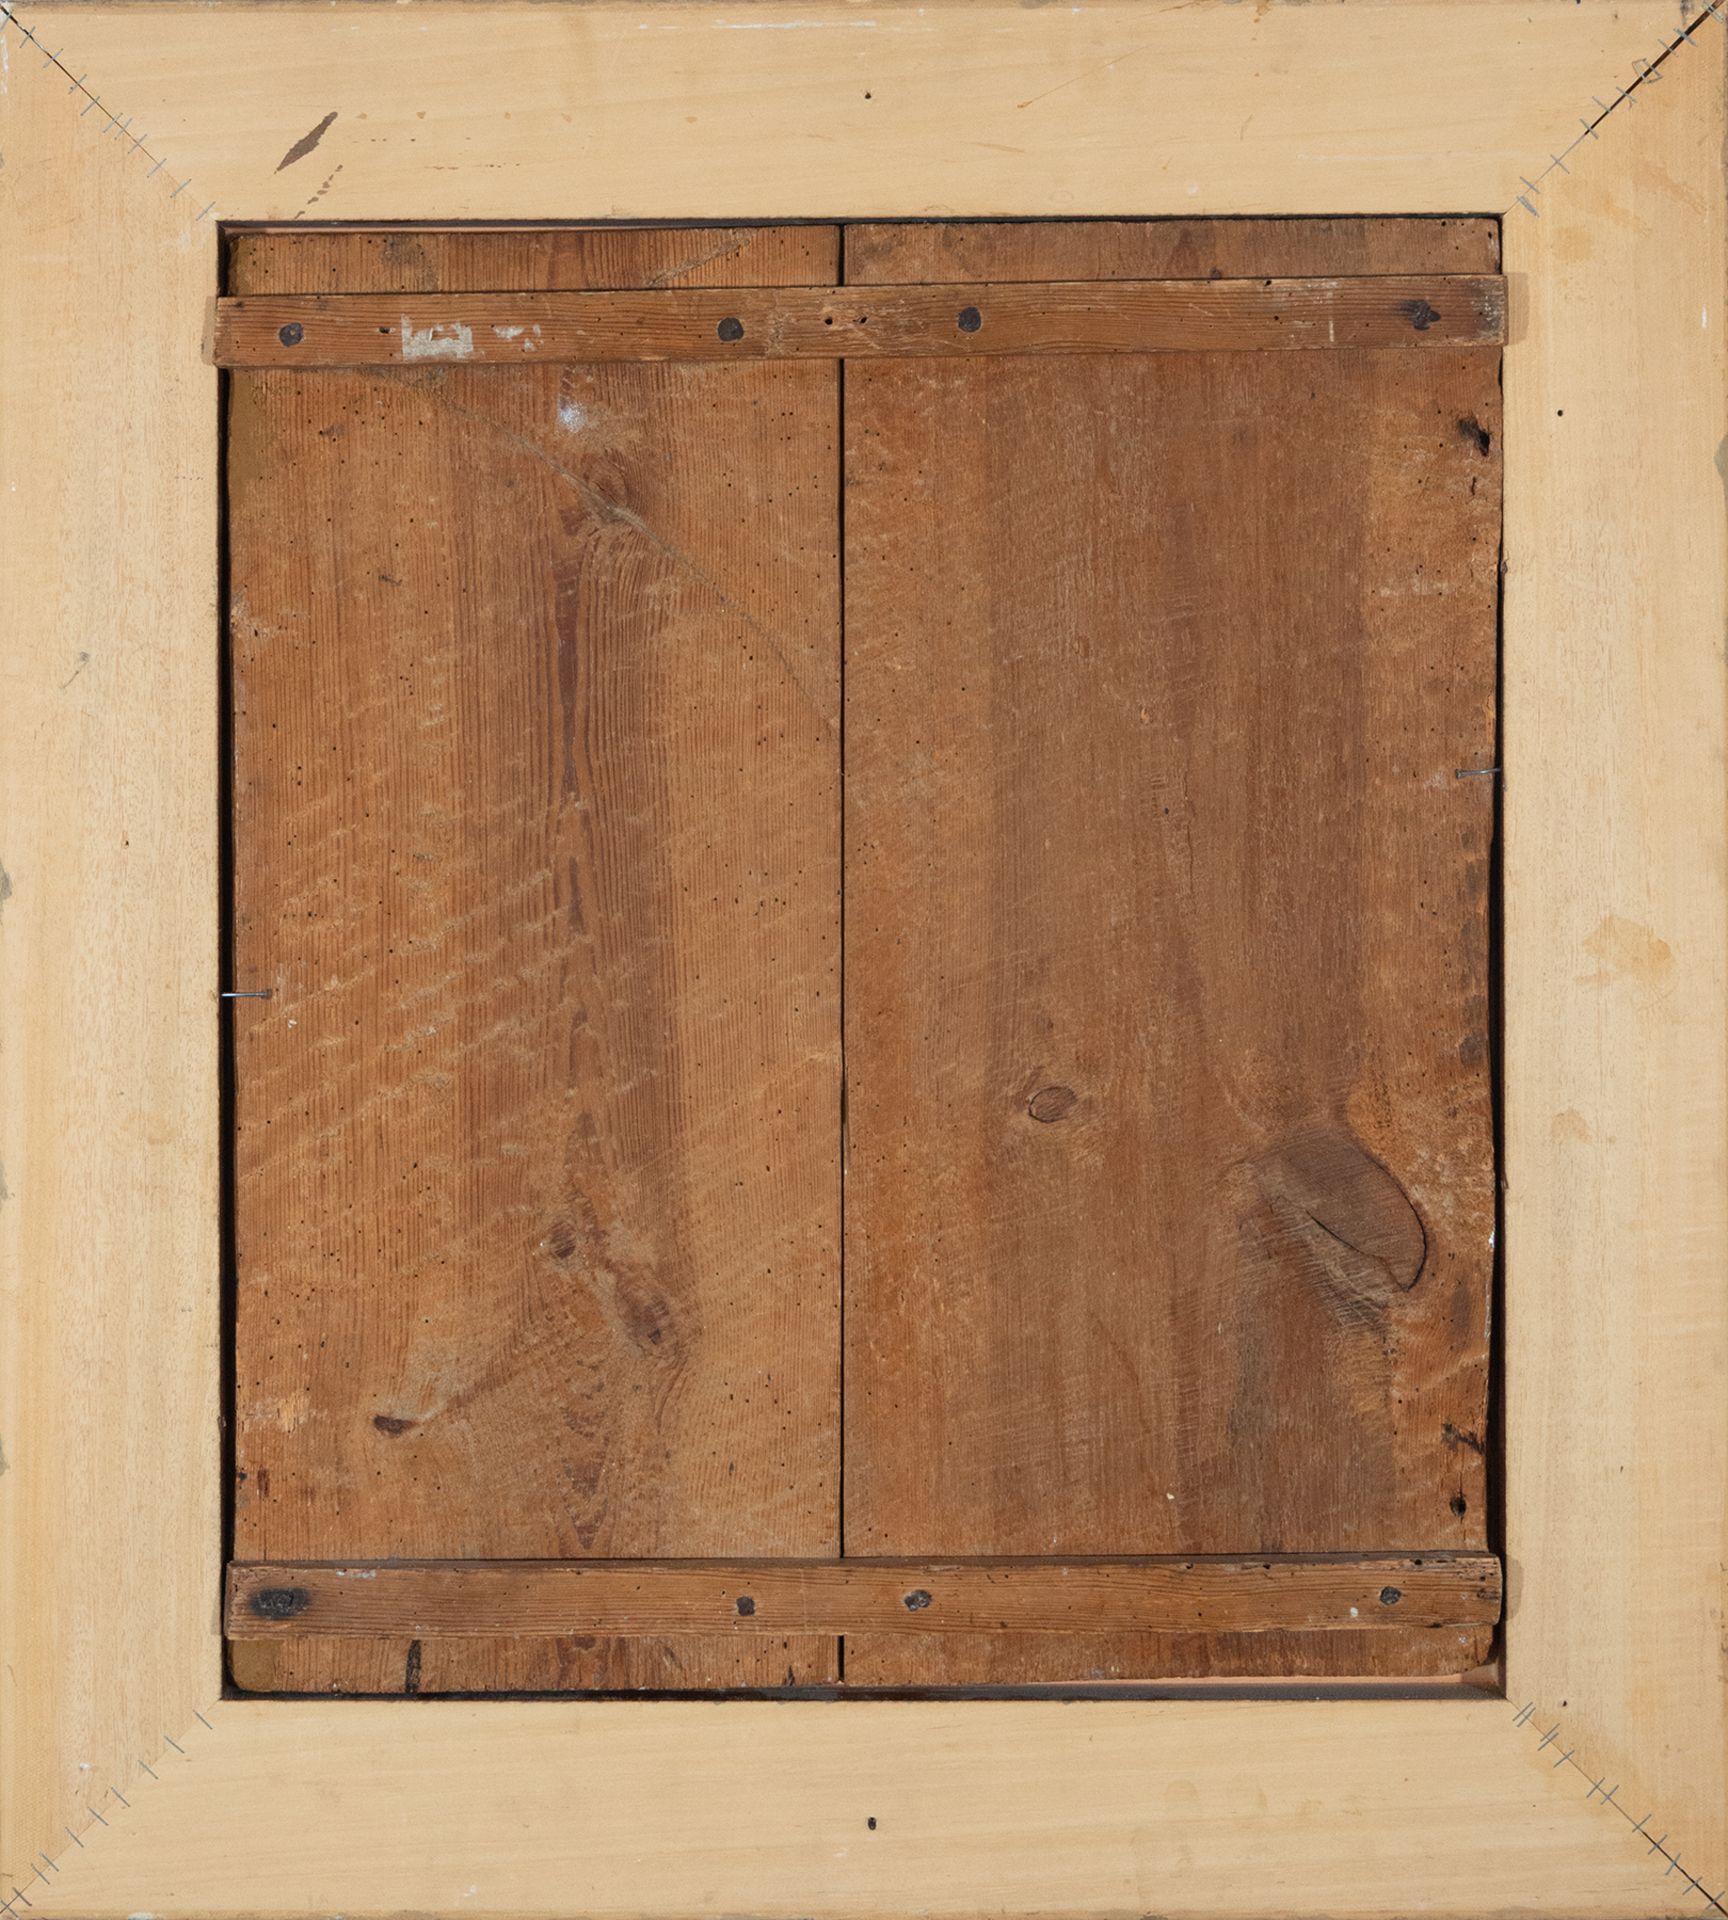 Cordovan in leather glued to board, Peruvian Viceroyalty colonial school of the 17th century - Bild 2 aus 2